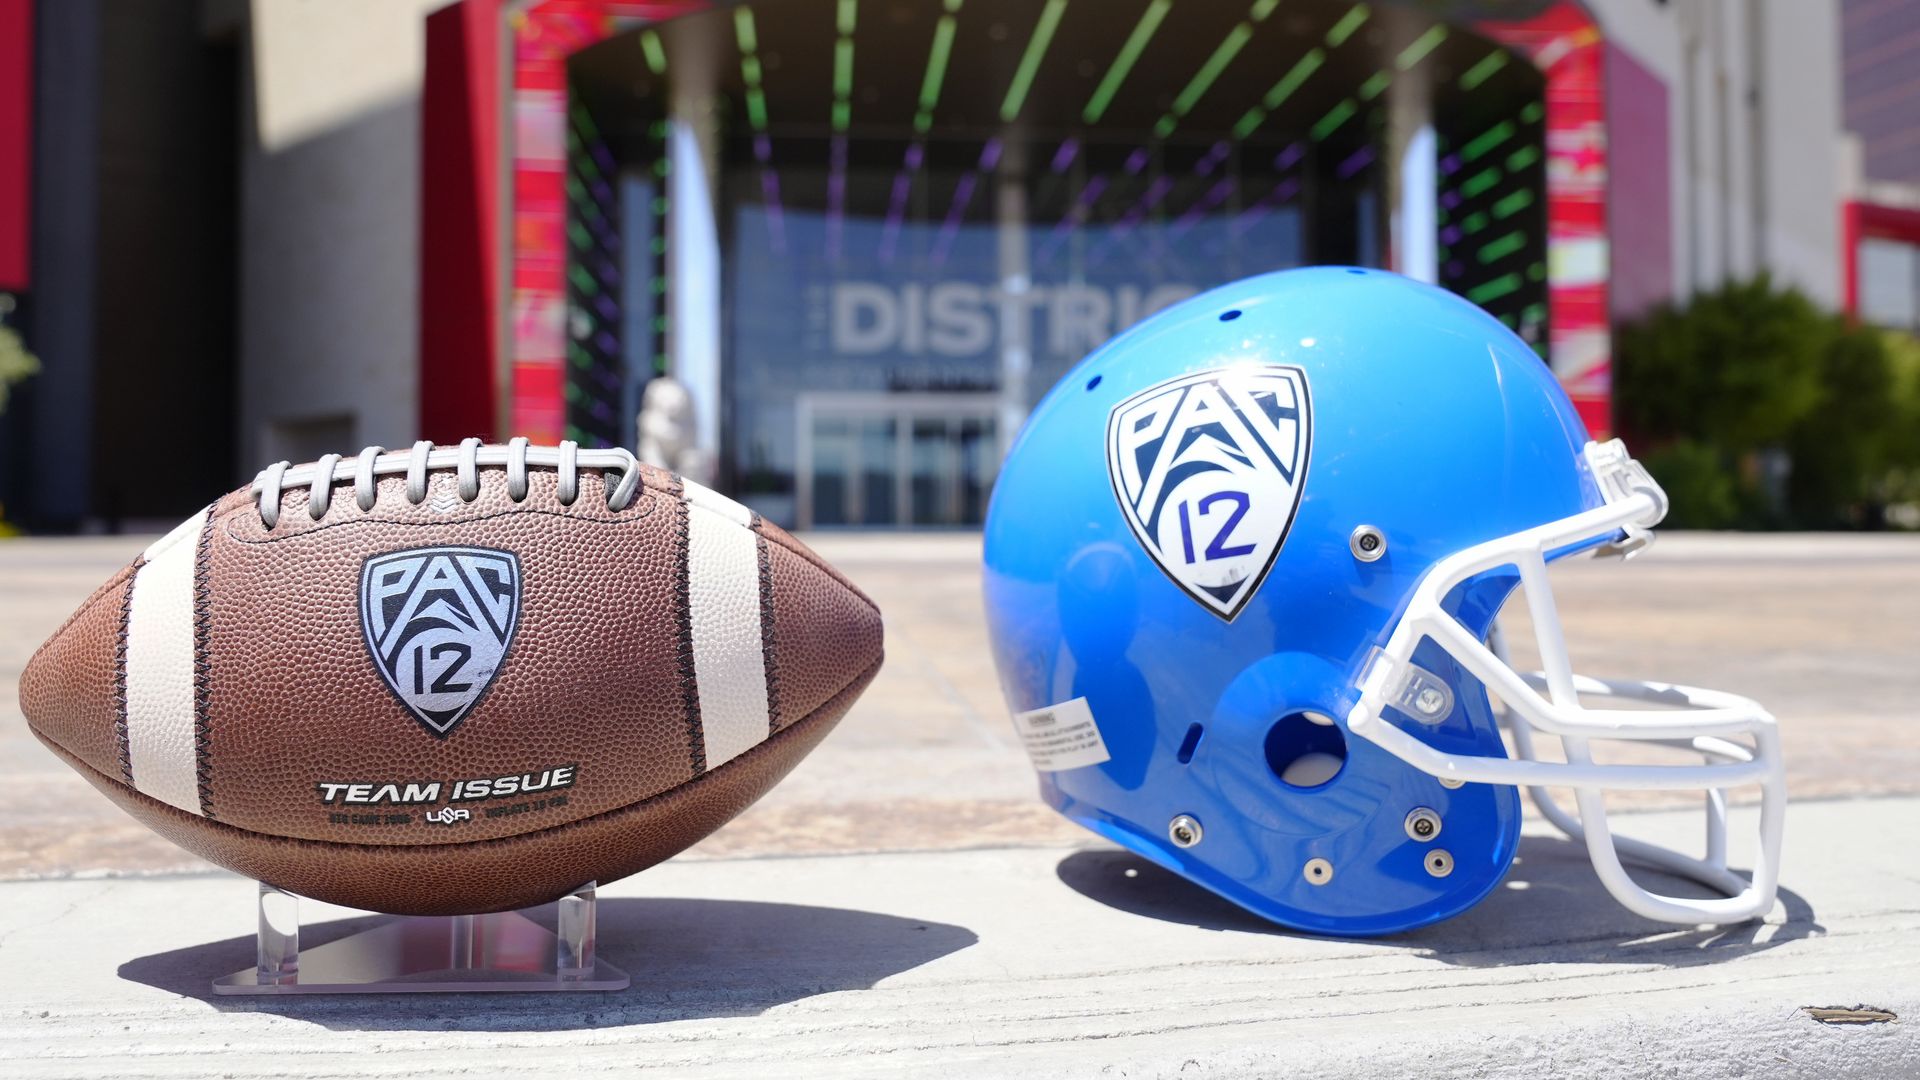 A football and a football helmet with Pac 12 logos on them on the ground in front of the entrance to a stadium.